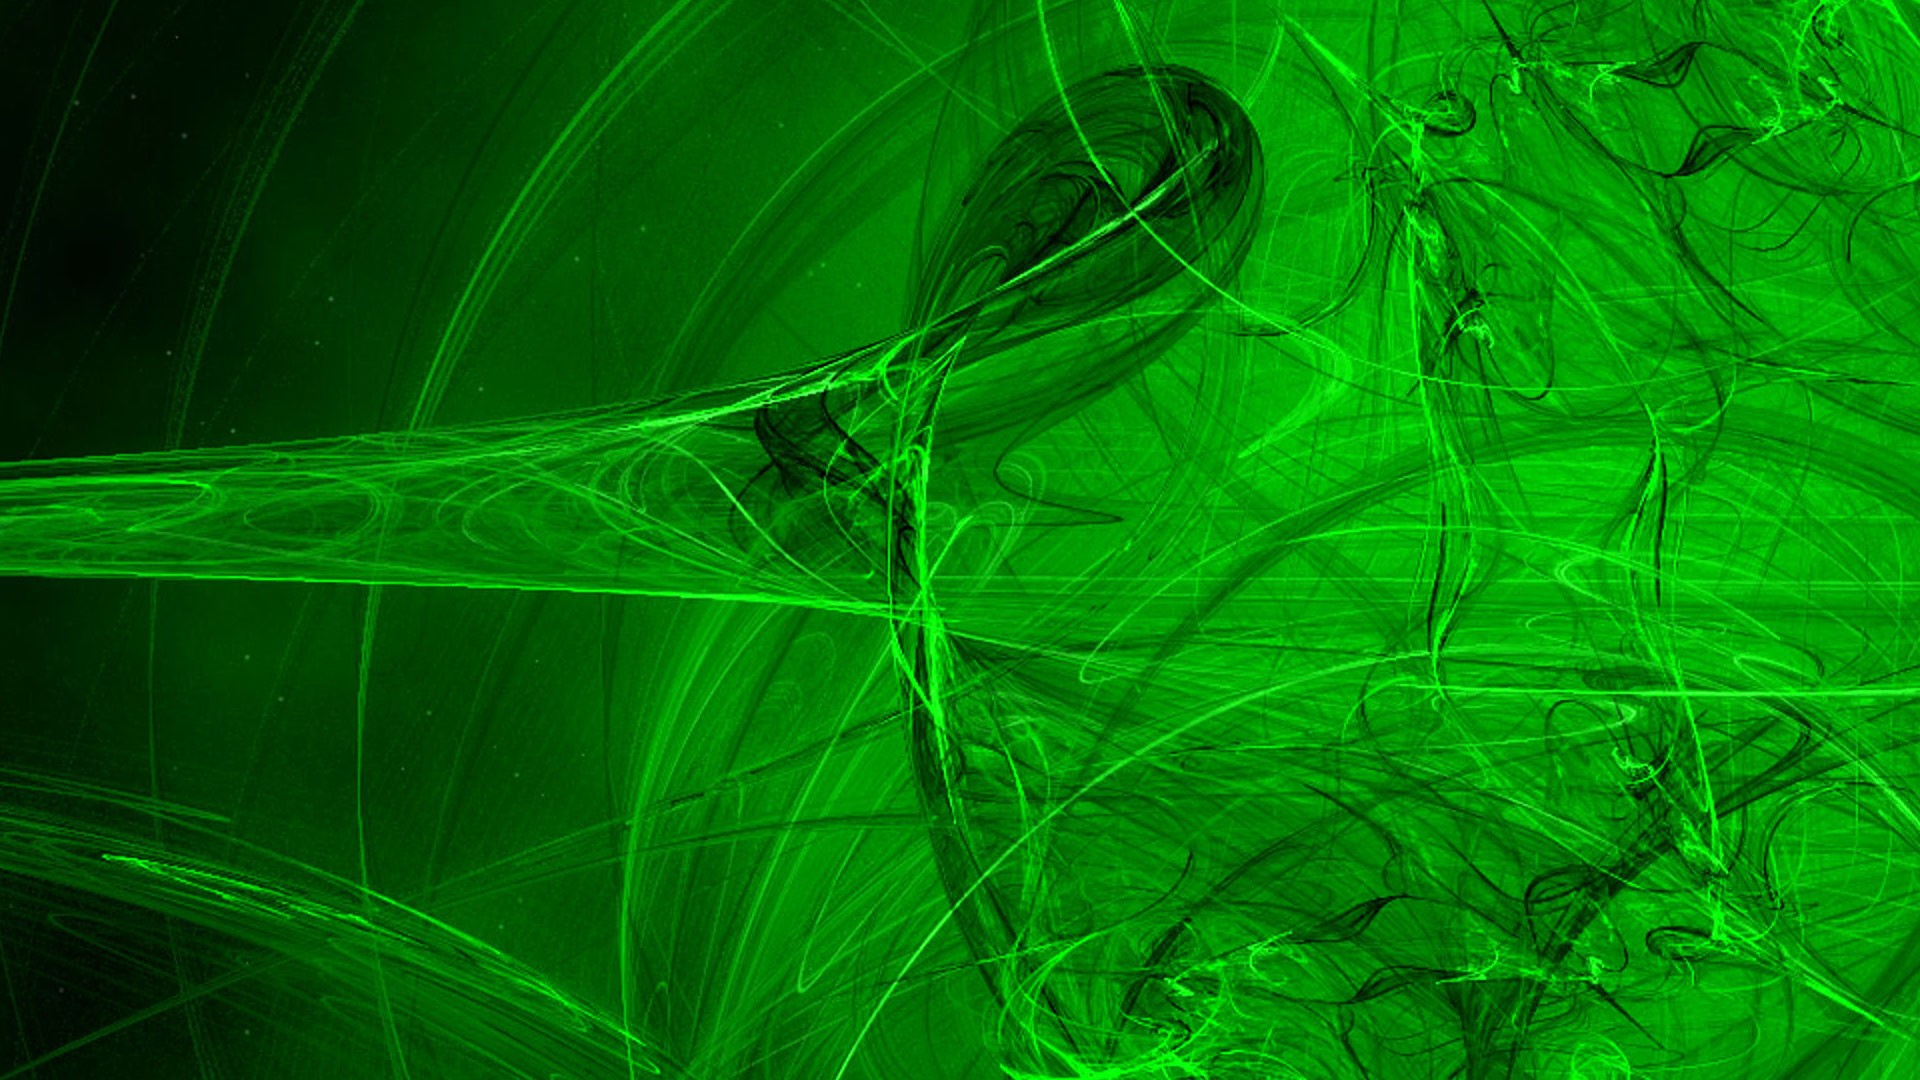 Green Neon Desktop Backgrounds With Resolution 1920X1080 pixel. You can make this wallpaper for your Desktop Computer Backgrounds, Mac Wallpapers, Android Lock screen or iPhone Screensavers